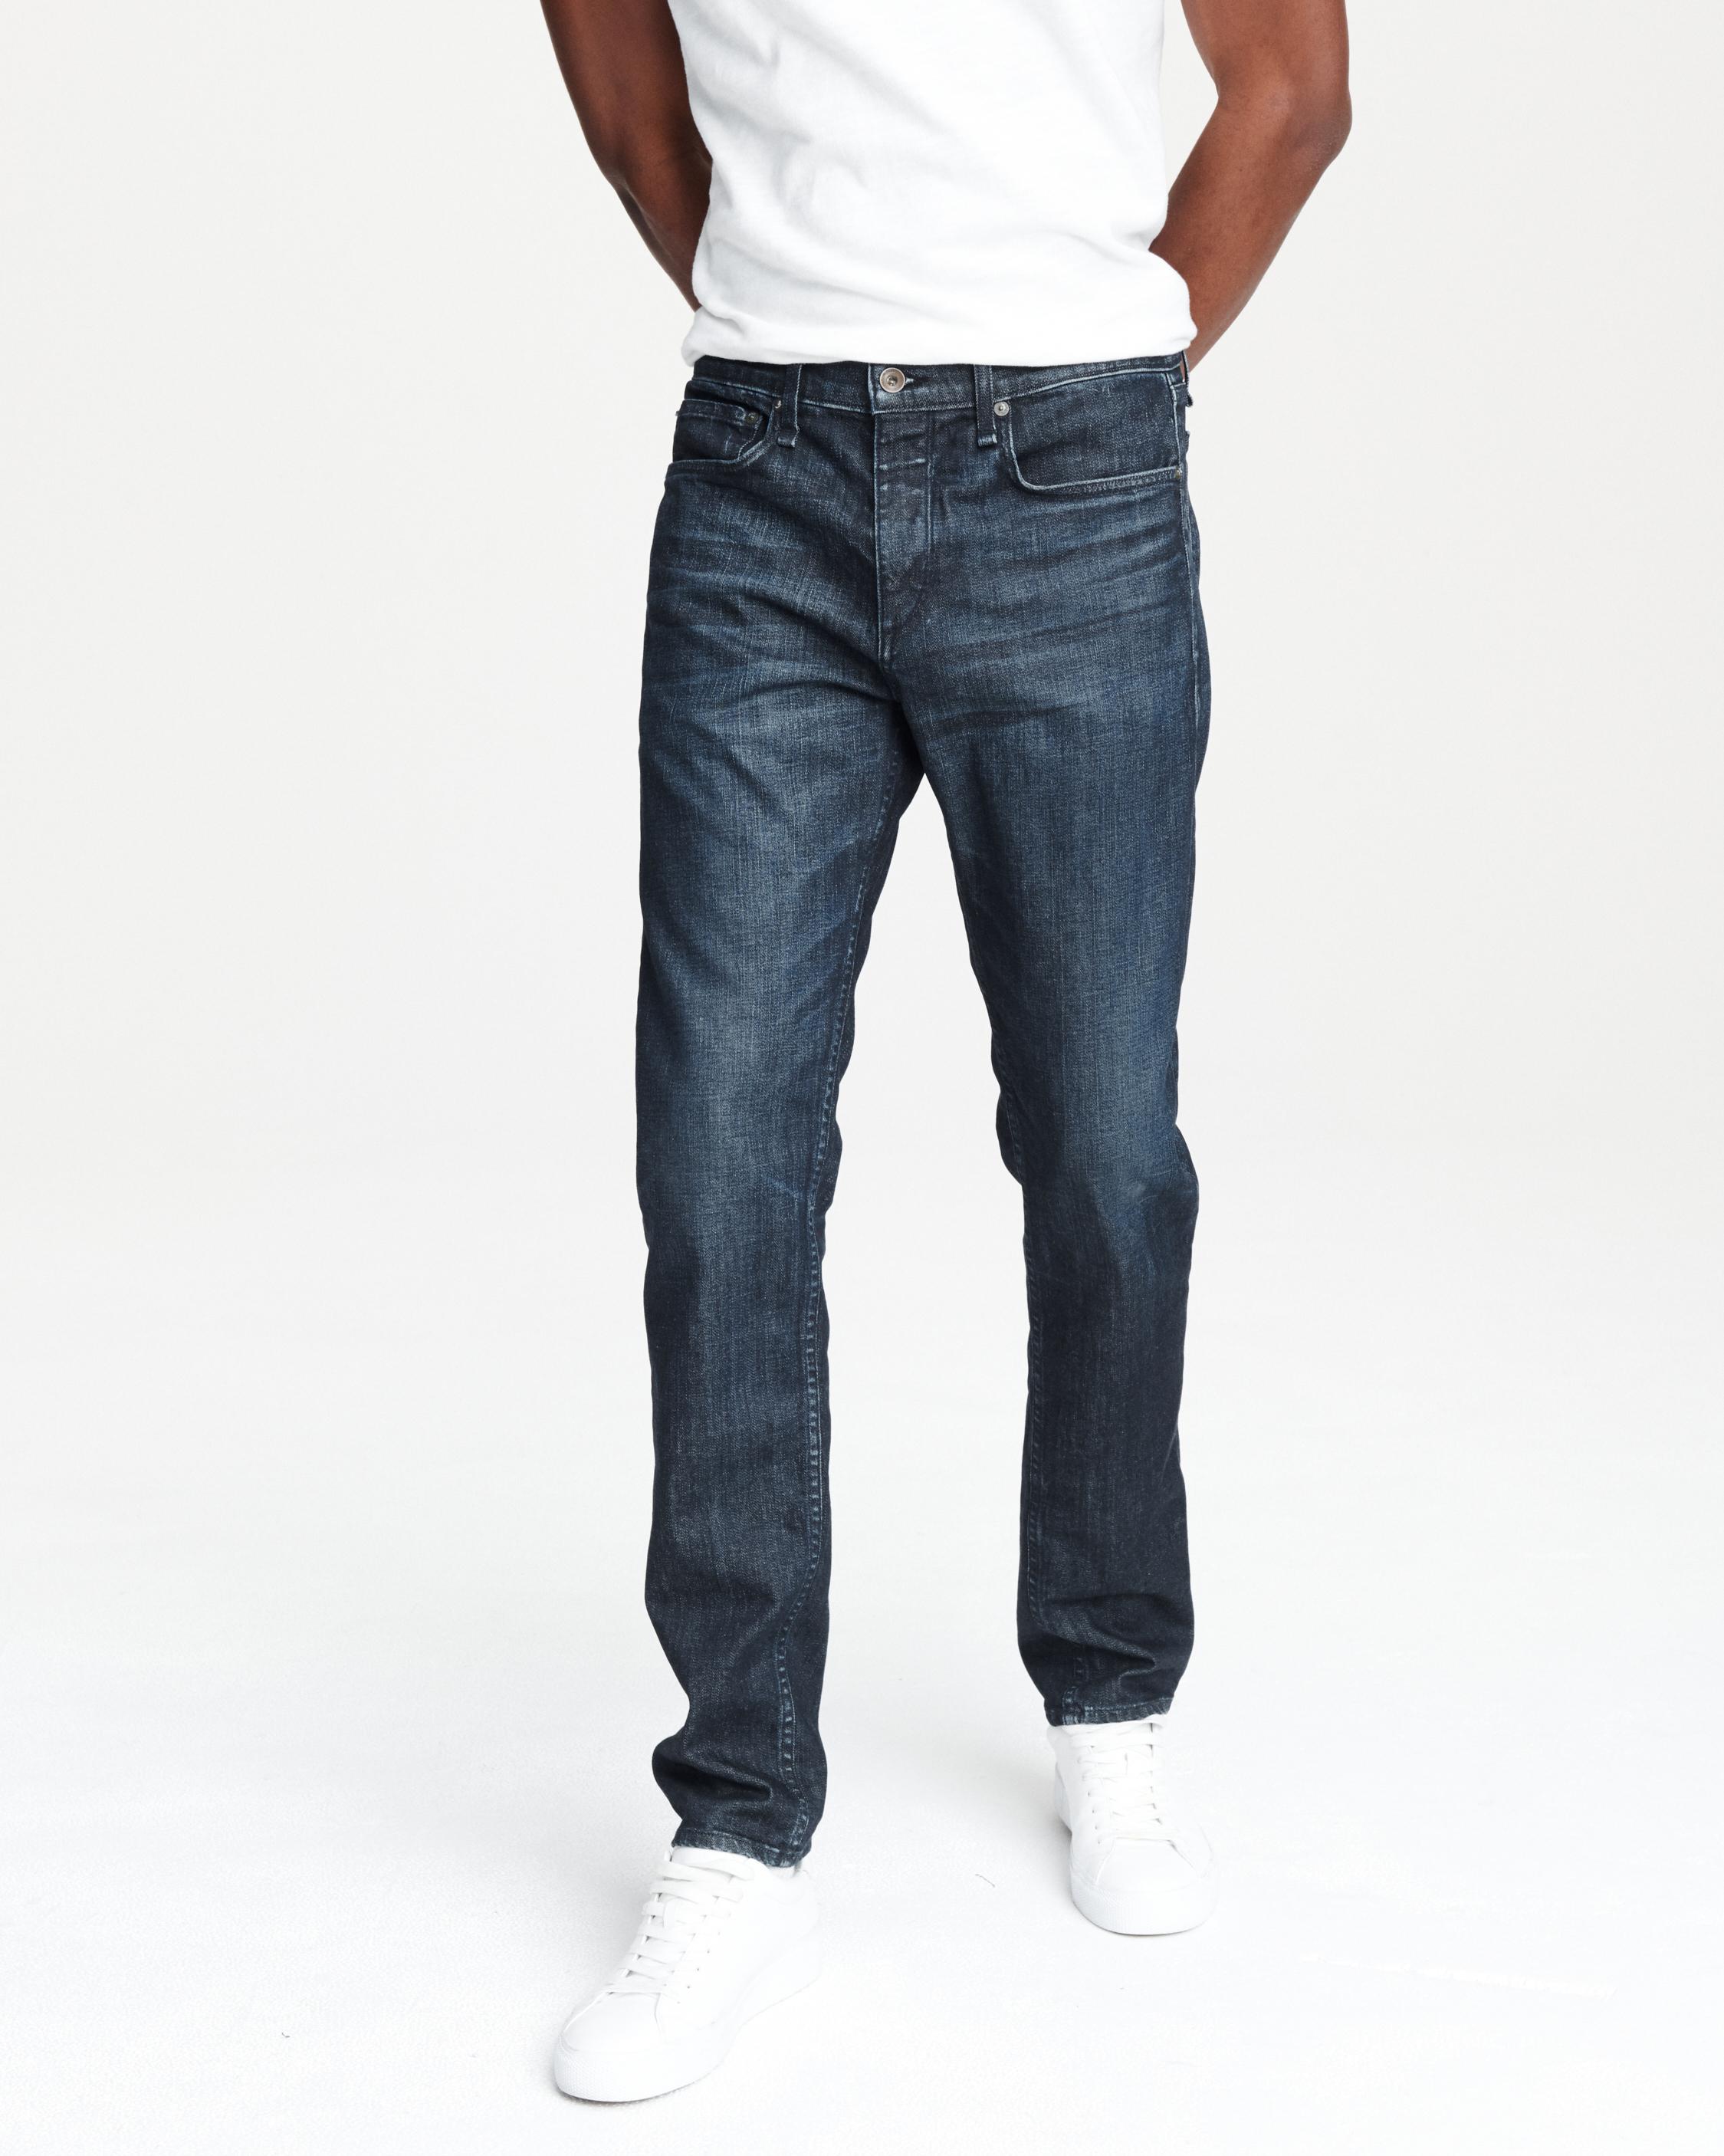 Men's Clothing & Accessories With Urban Style | rag & bone